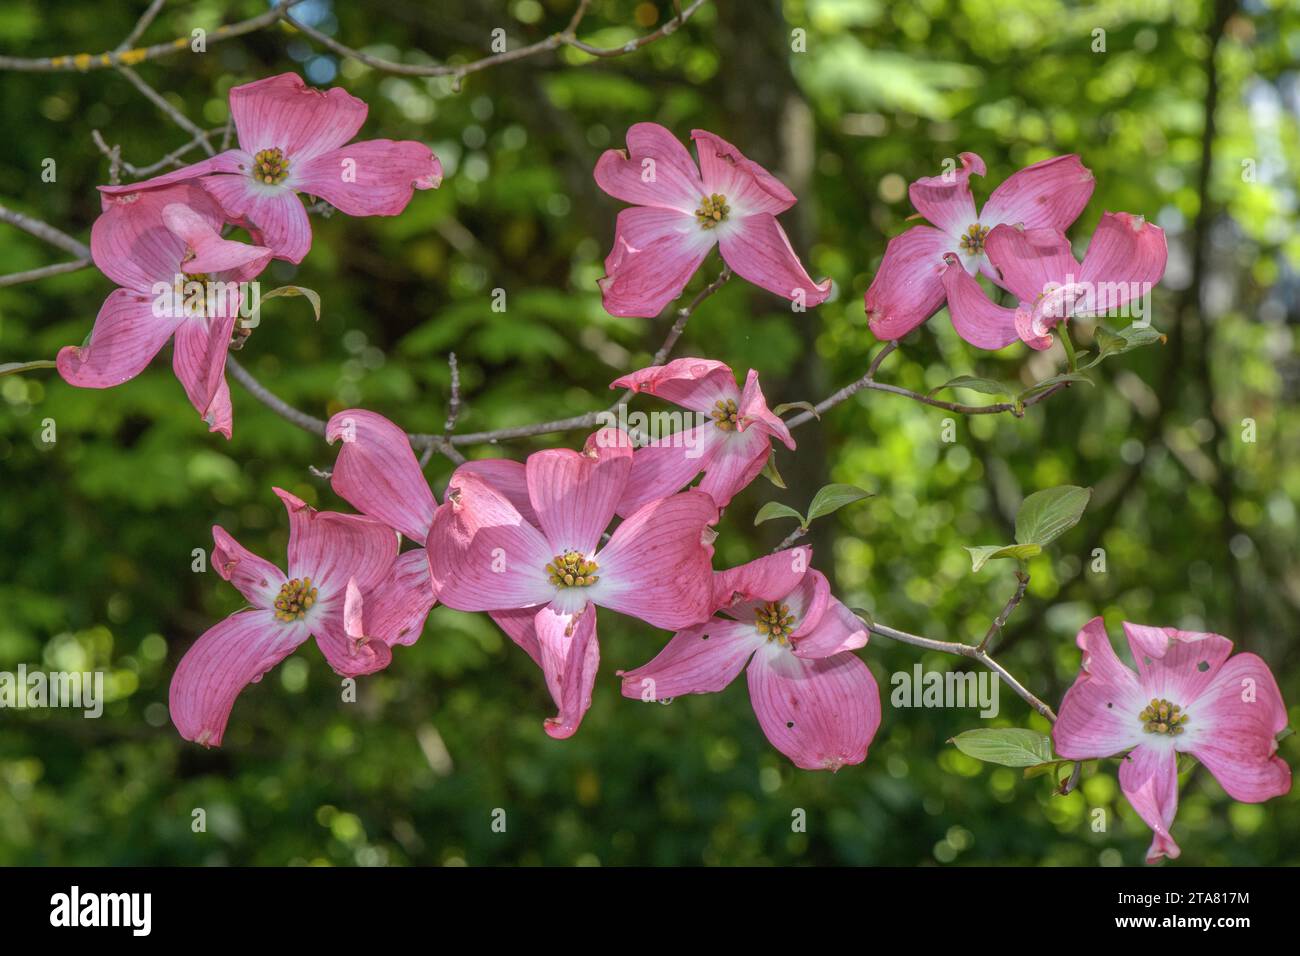 Pink form of Flowering dogwood, Cornus florida, in cultivation. Stock Photo